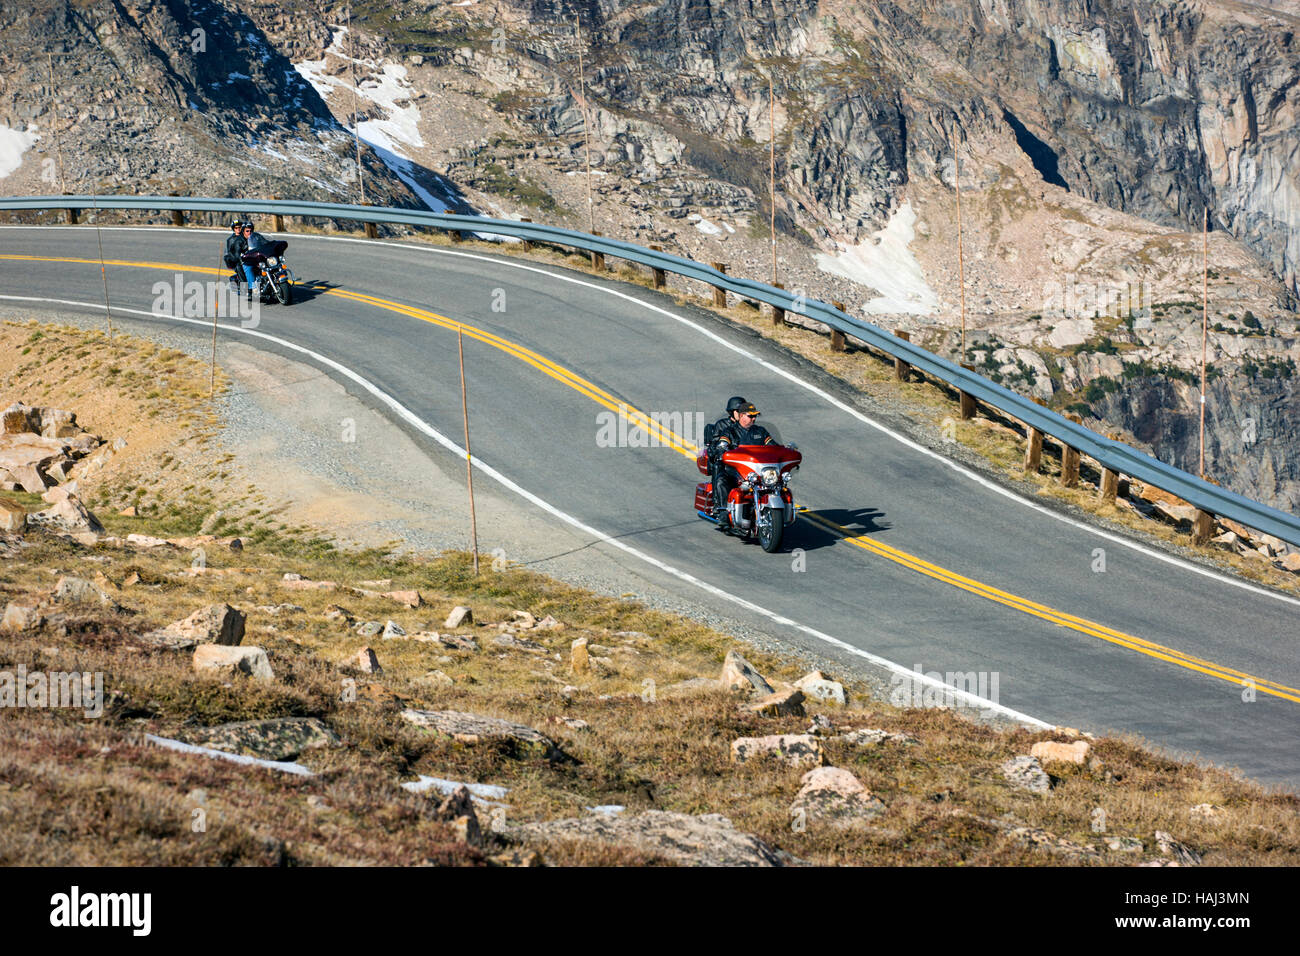 Motocyclistes sur la Beartooth Scenic Byway (Rt. 212) (10 947 Beartooth Pass croix') entre Cooke City, Wyoming, et Red Lodge, Montana, USA Banque D'Images